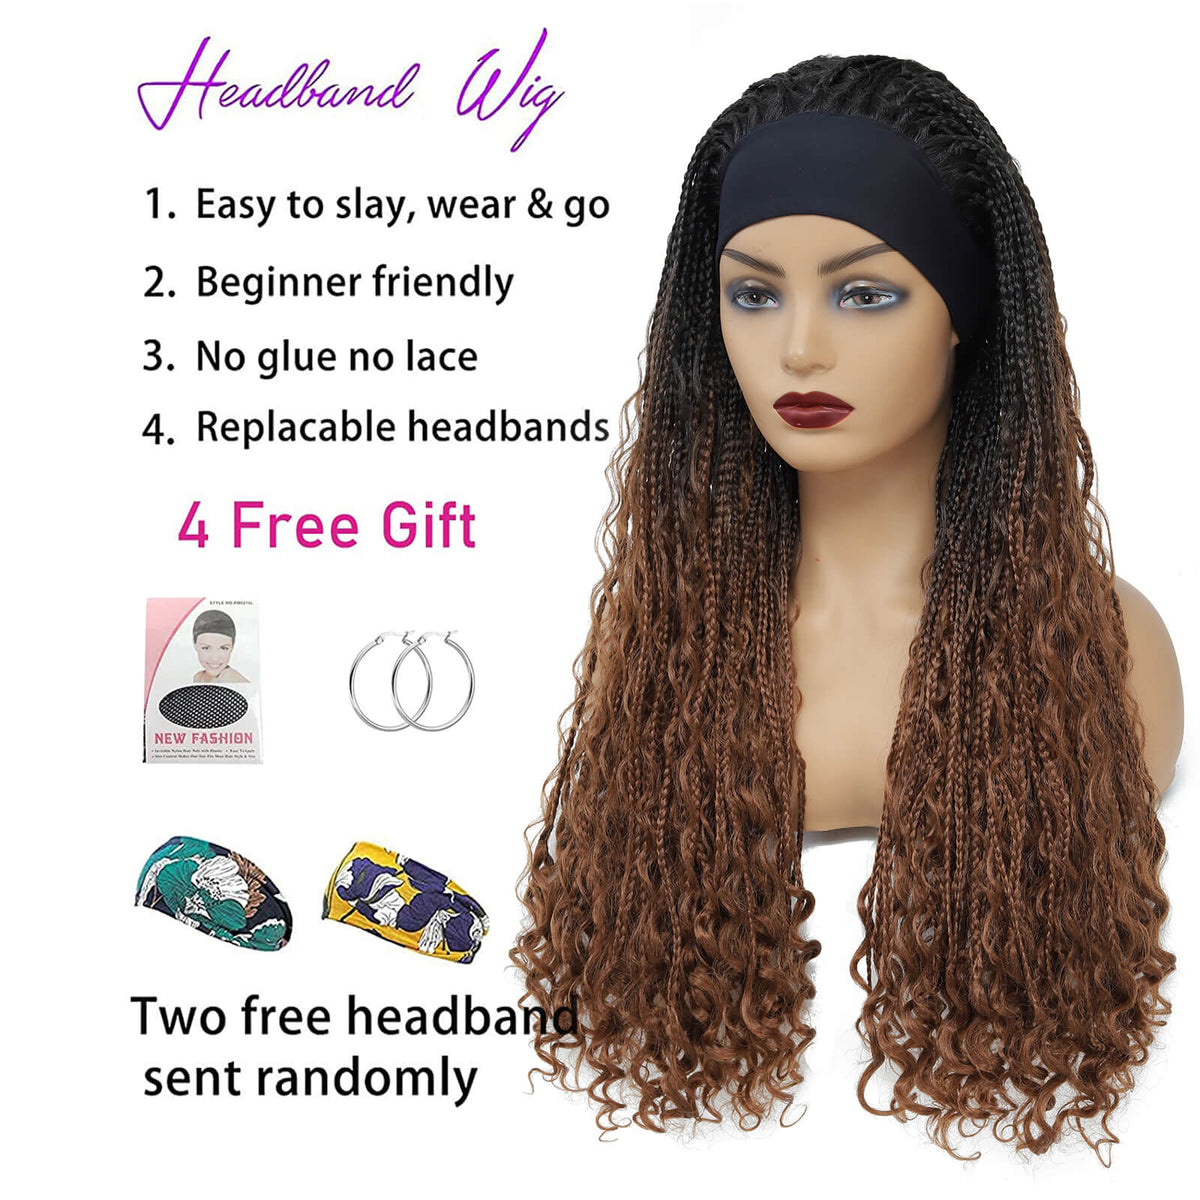 Headband Braided Wigs With Free Tress Box Braided Wigs for Black Women #30 Long Micro Braids Wig Ombre Brown Color